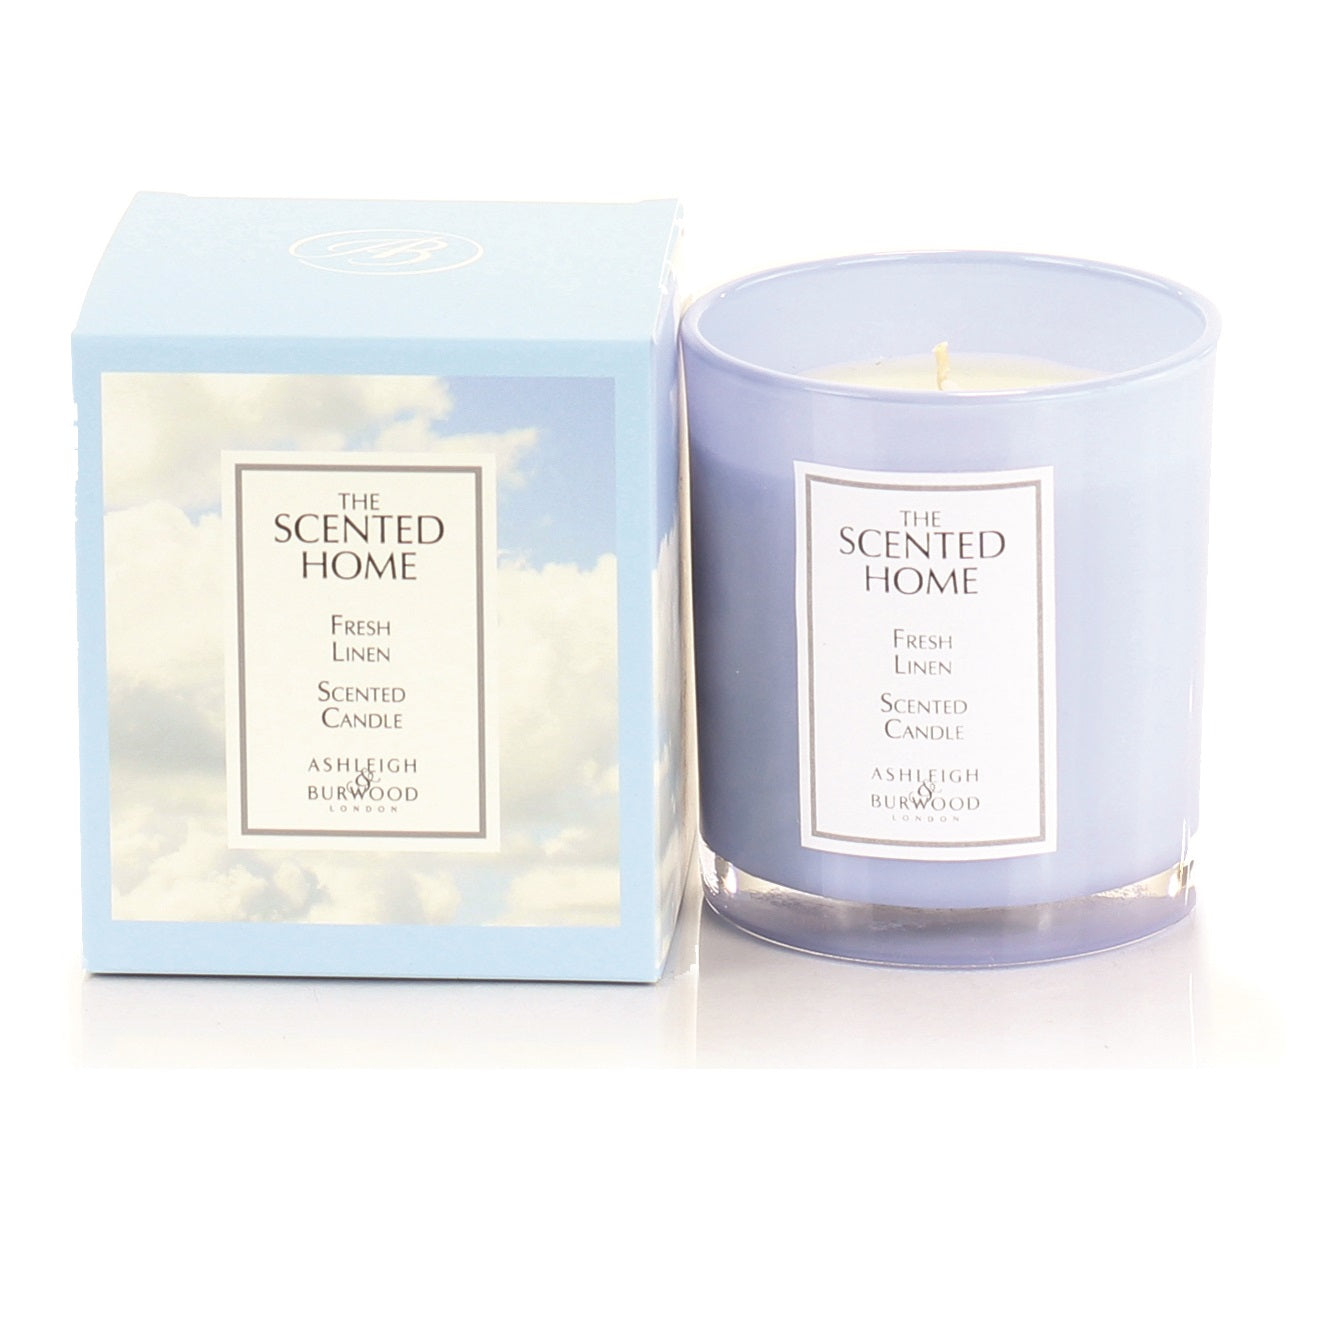 BOXED GLASS CANDLE 225G FRESH LINEN - SCENTED HOME